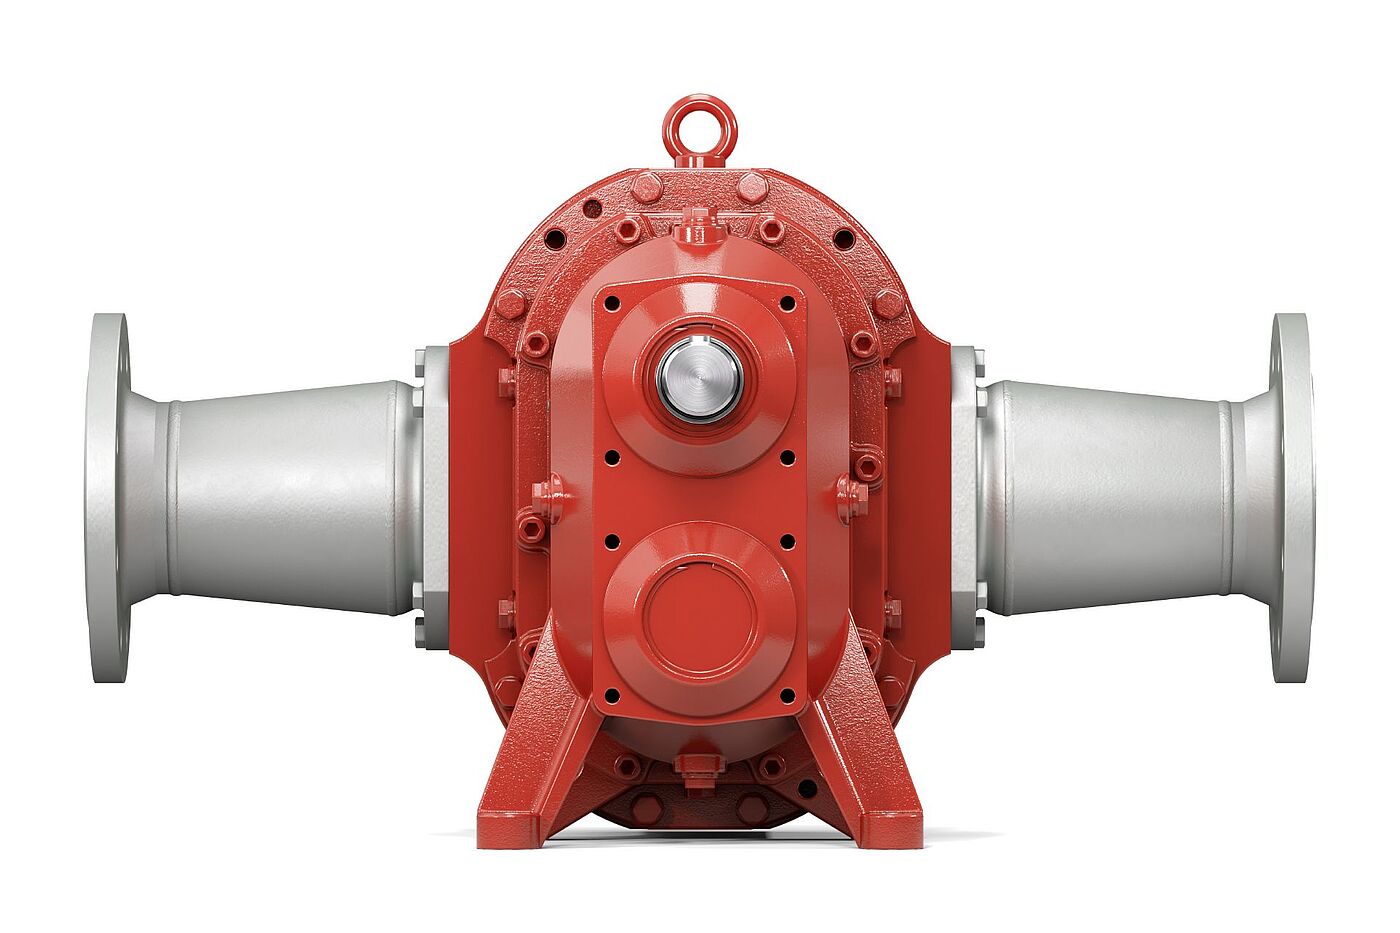 Rotary lobe pump of the VY series by Vogelsang